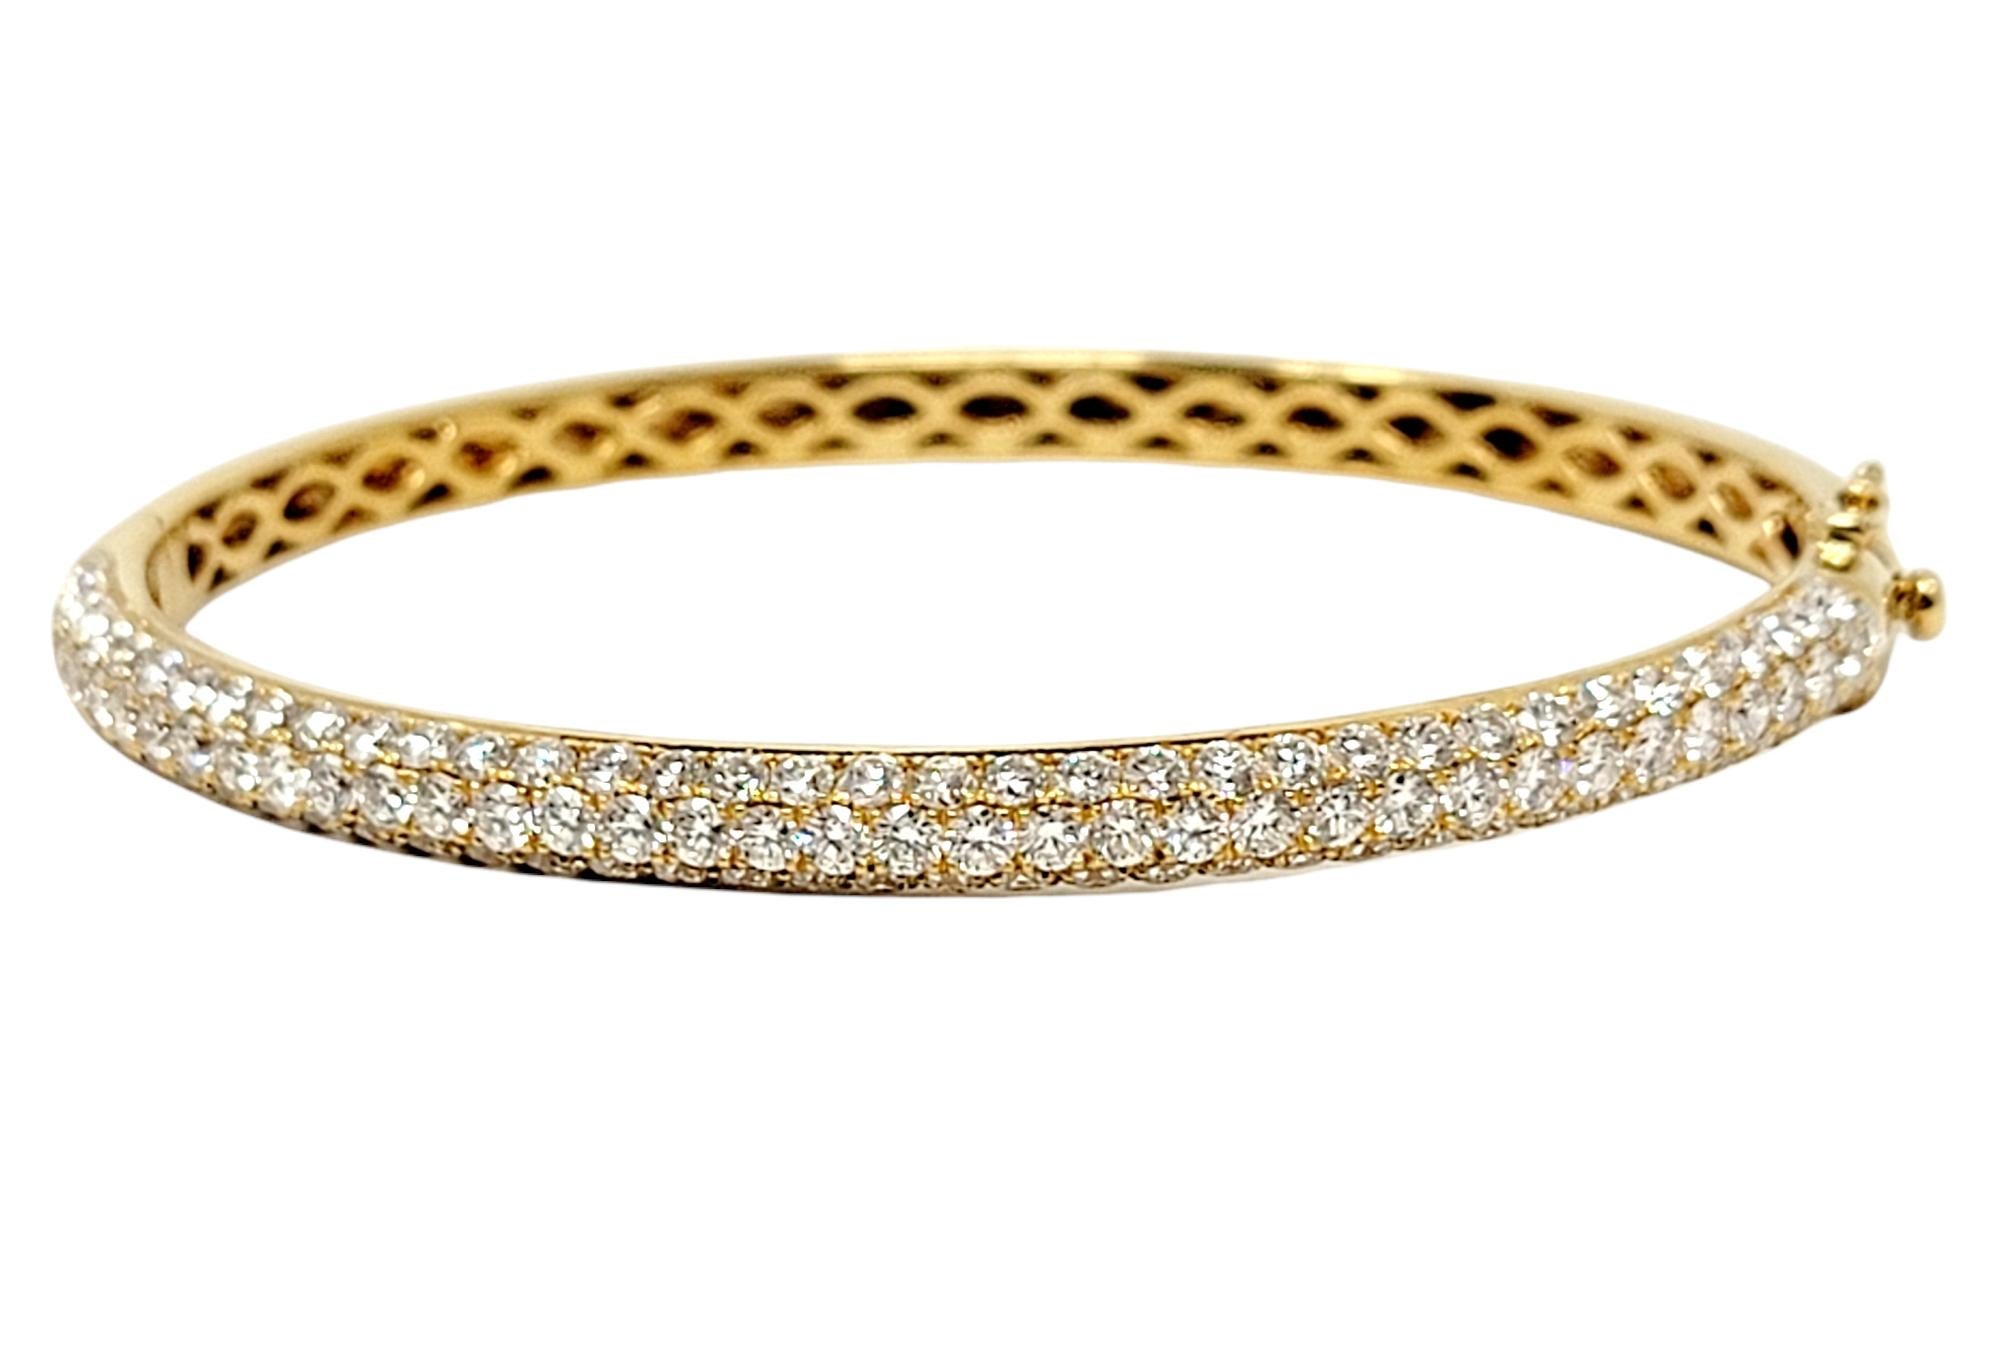 Absolutely beautiful pave diamond bangle bracelet by Oliver Smith Jeweler. The sleek, modern design bursts with sparkle from all angles from the stunning natural icy white diamonds. This incredible piece can be stacked with other bracelets or worn